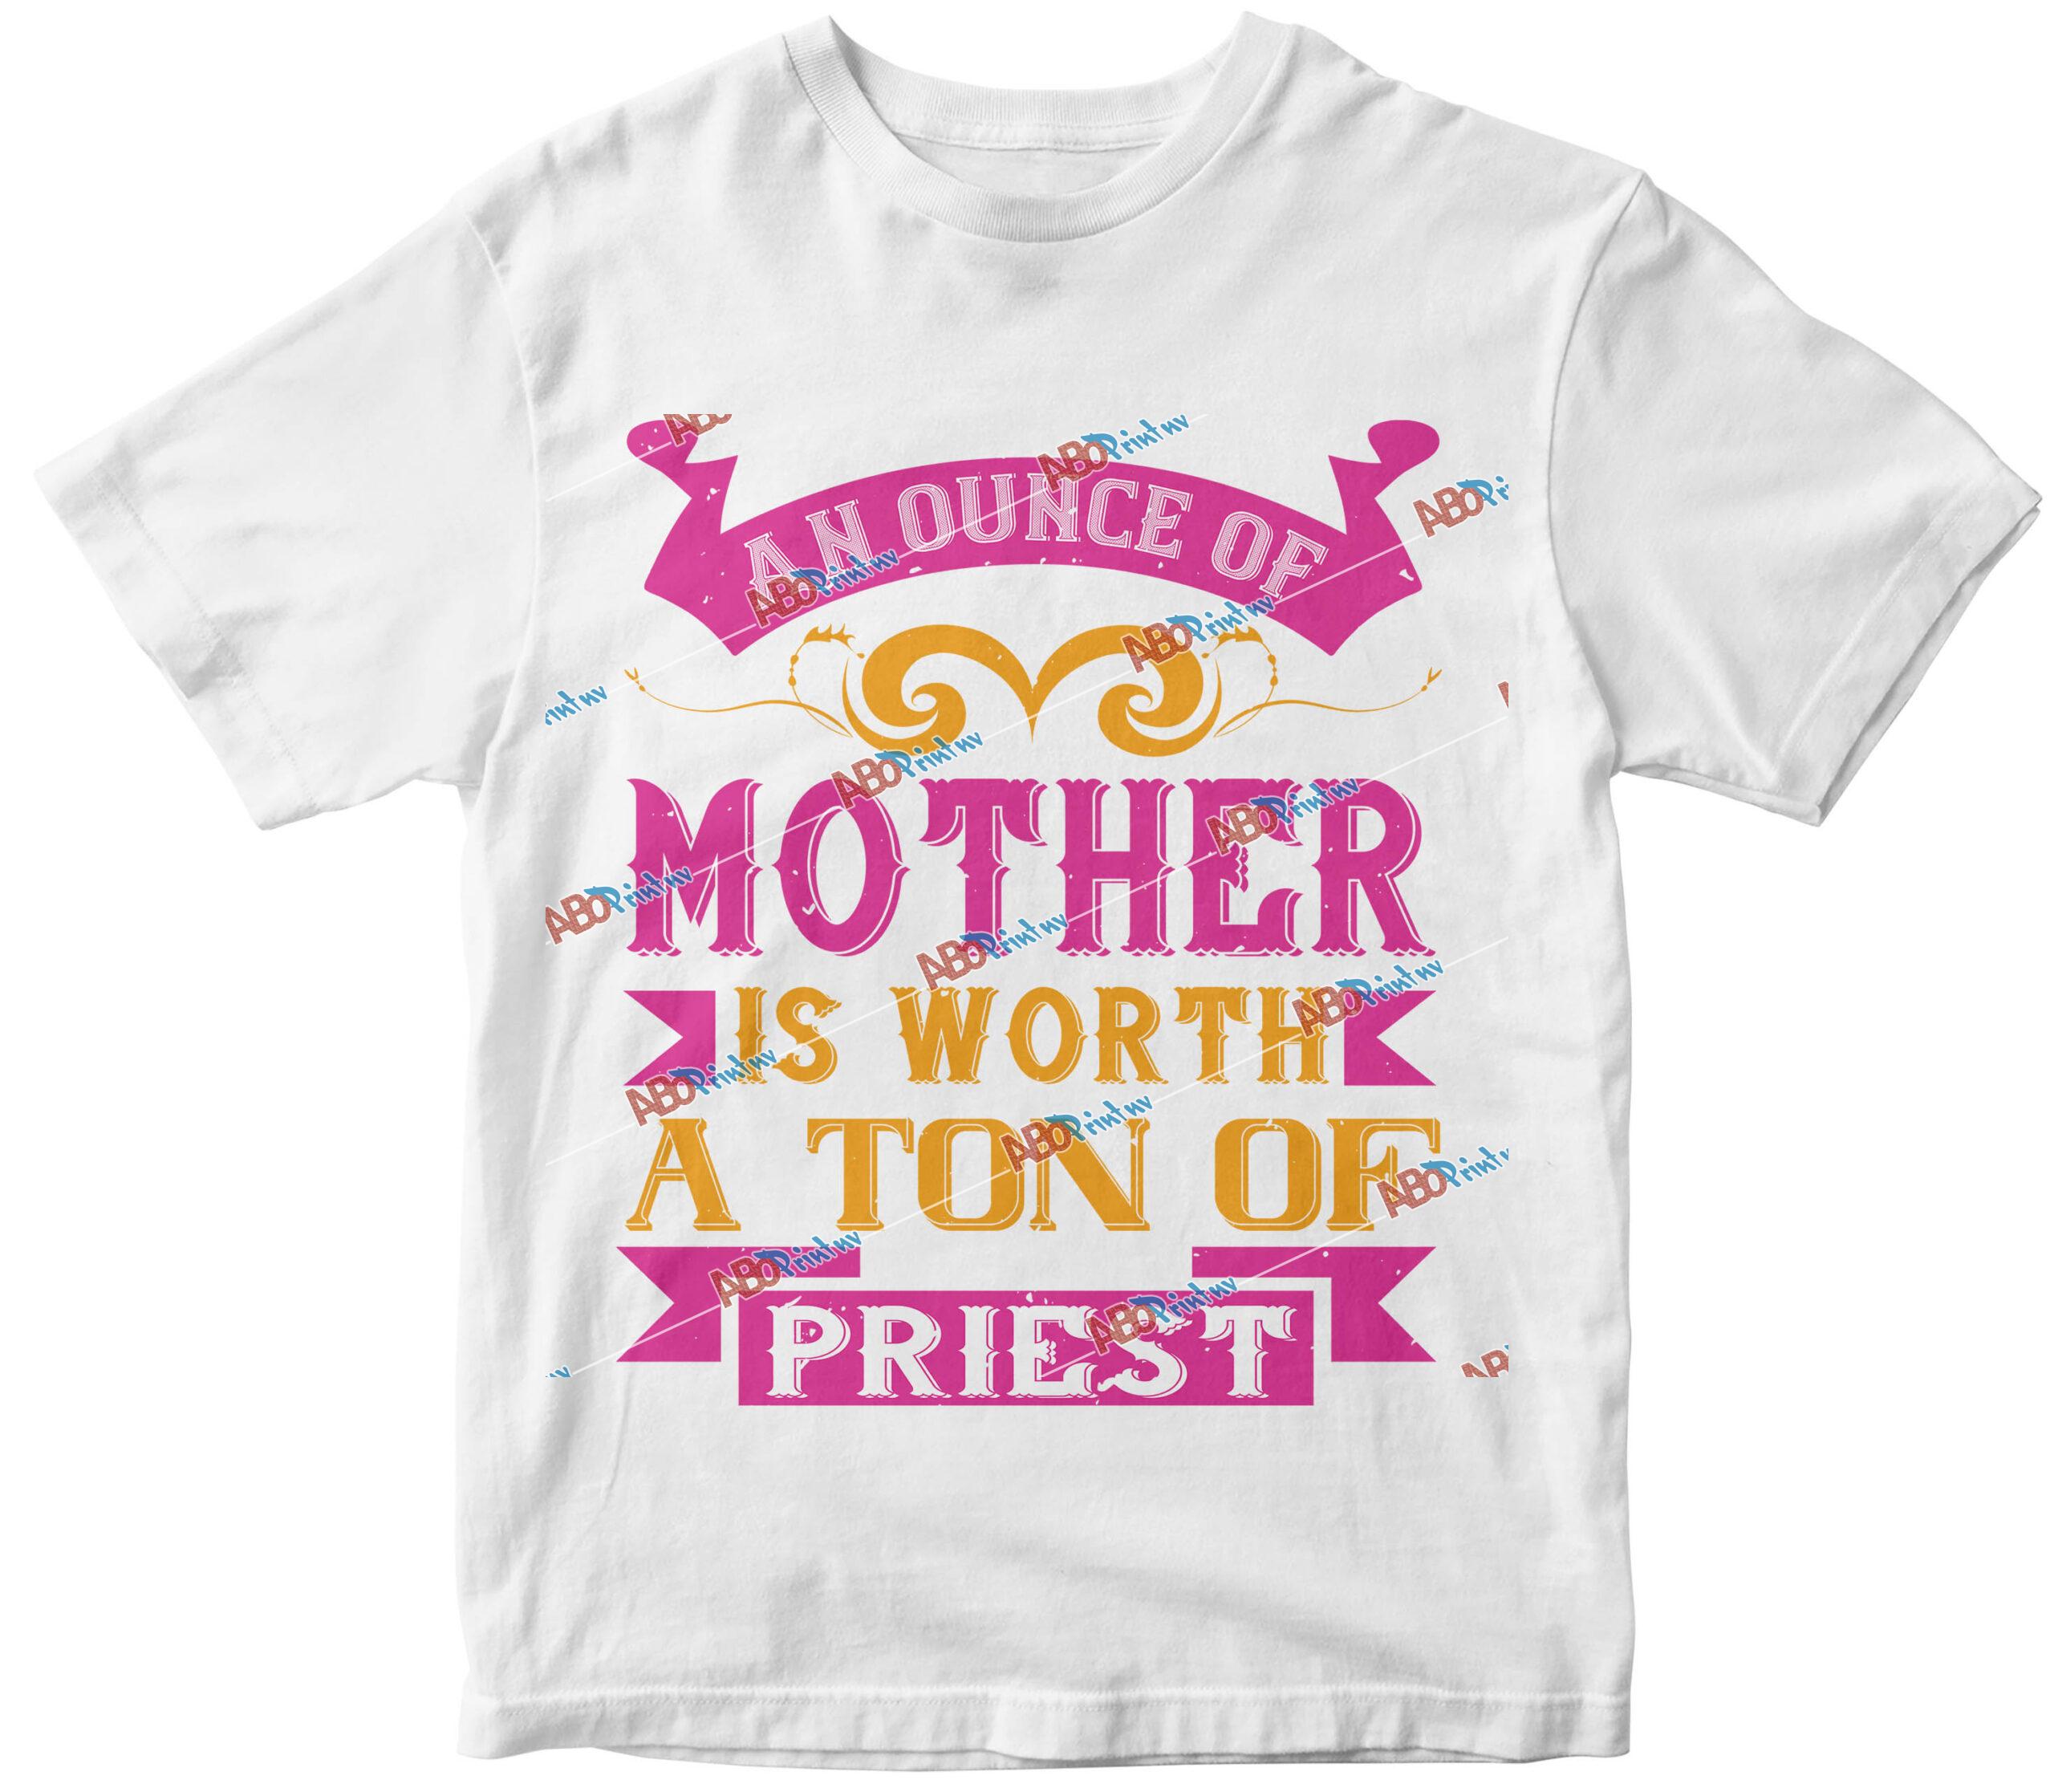 An ounce of mother is worth a ton of priest.jpg